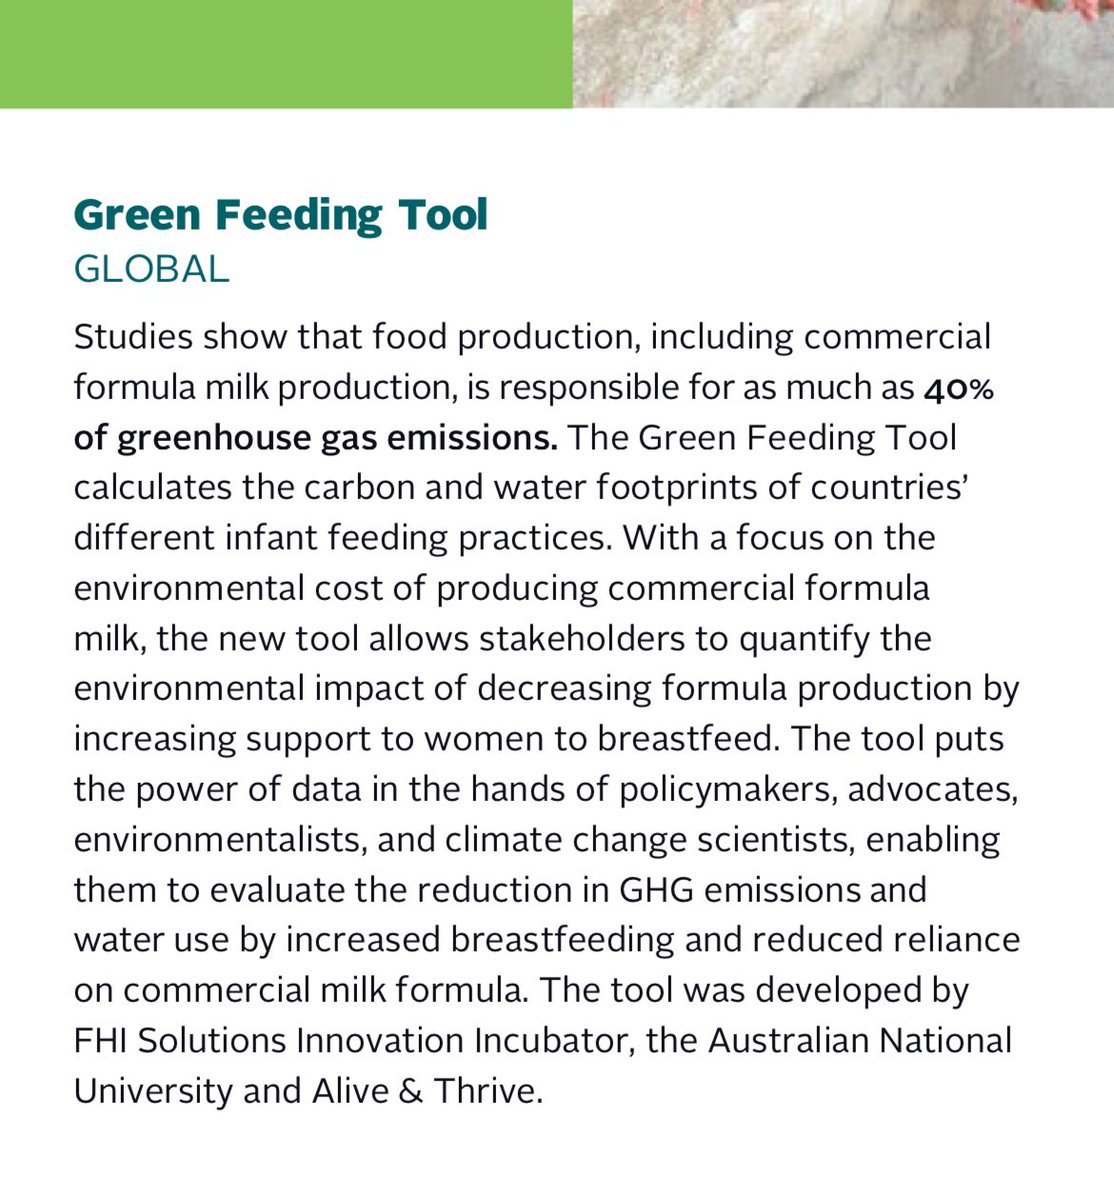 “The tool puts the power of data in the hands of policymakers, advocates, environmentalists, and (…) scientists, enabling them to evaluate the reduction in GHG emissions and water use by increased breastfeeding and reduced reliance on commercial milk formula” #GreenFeedingTool